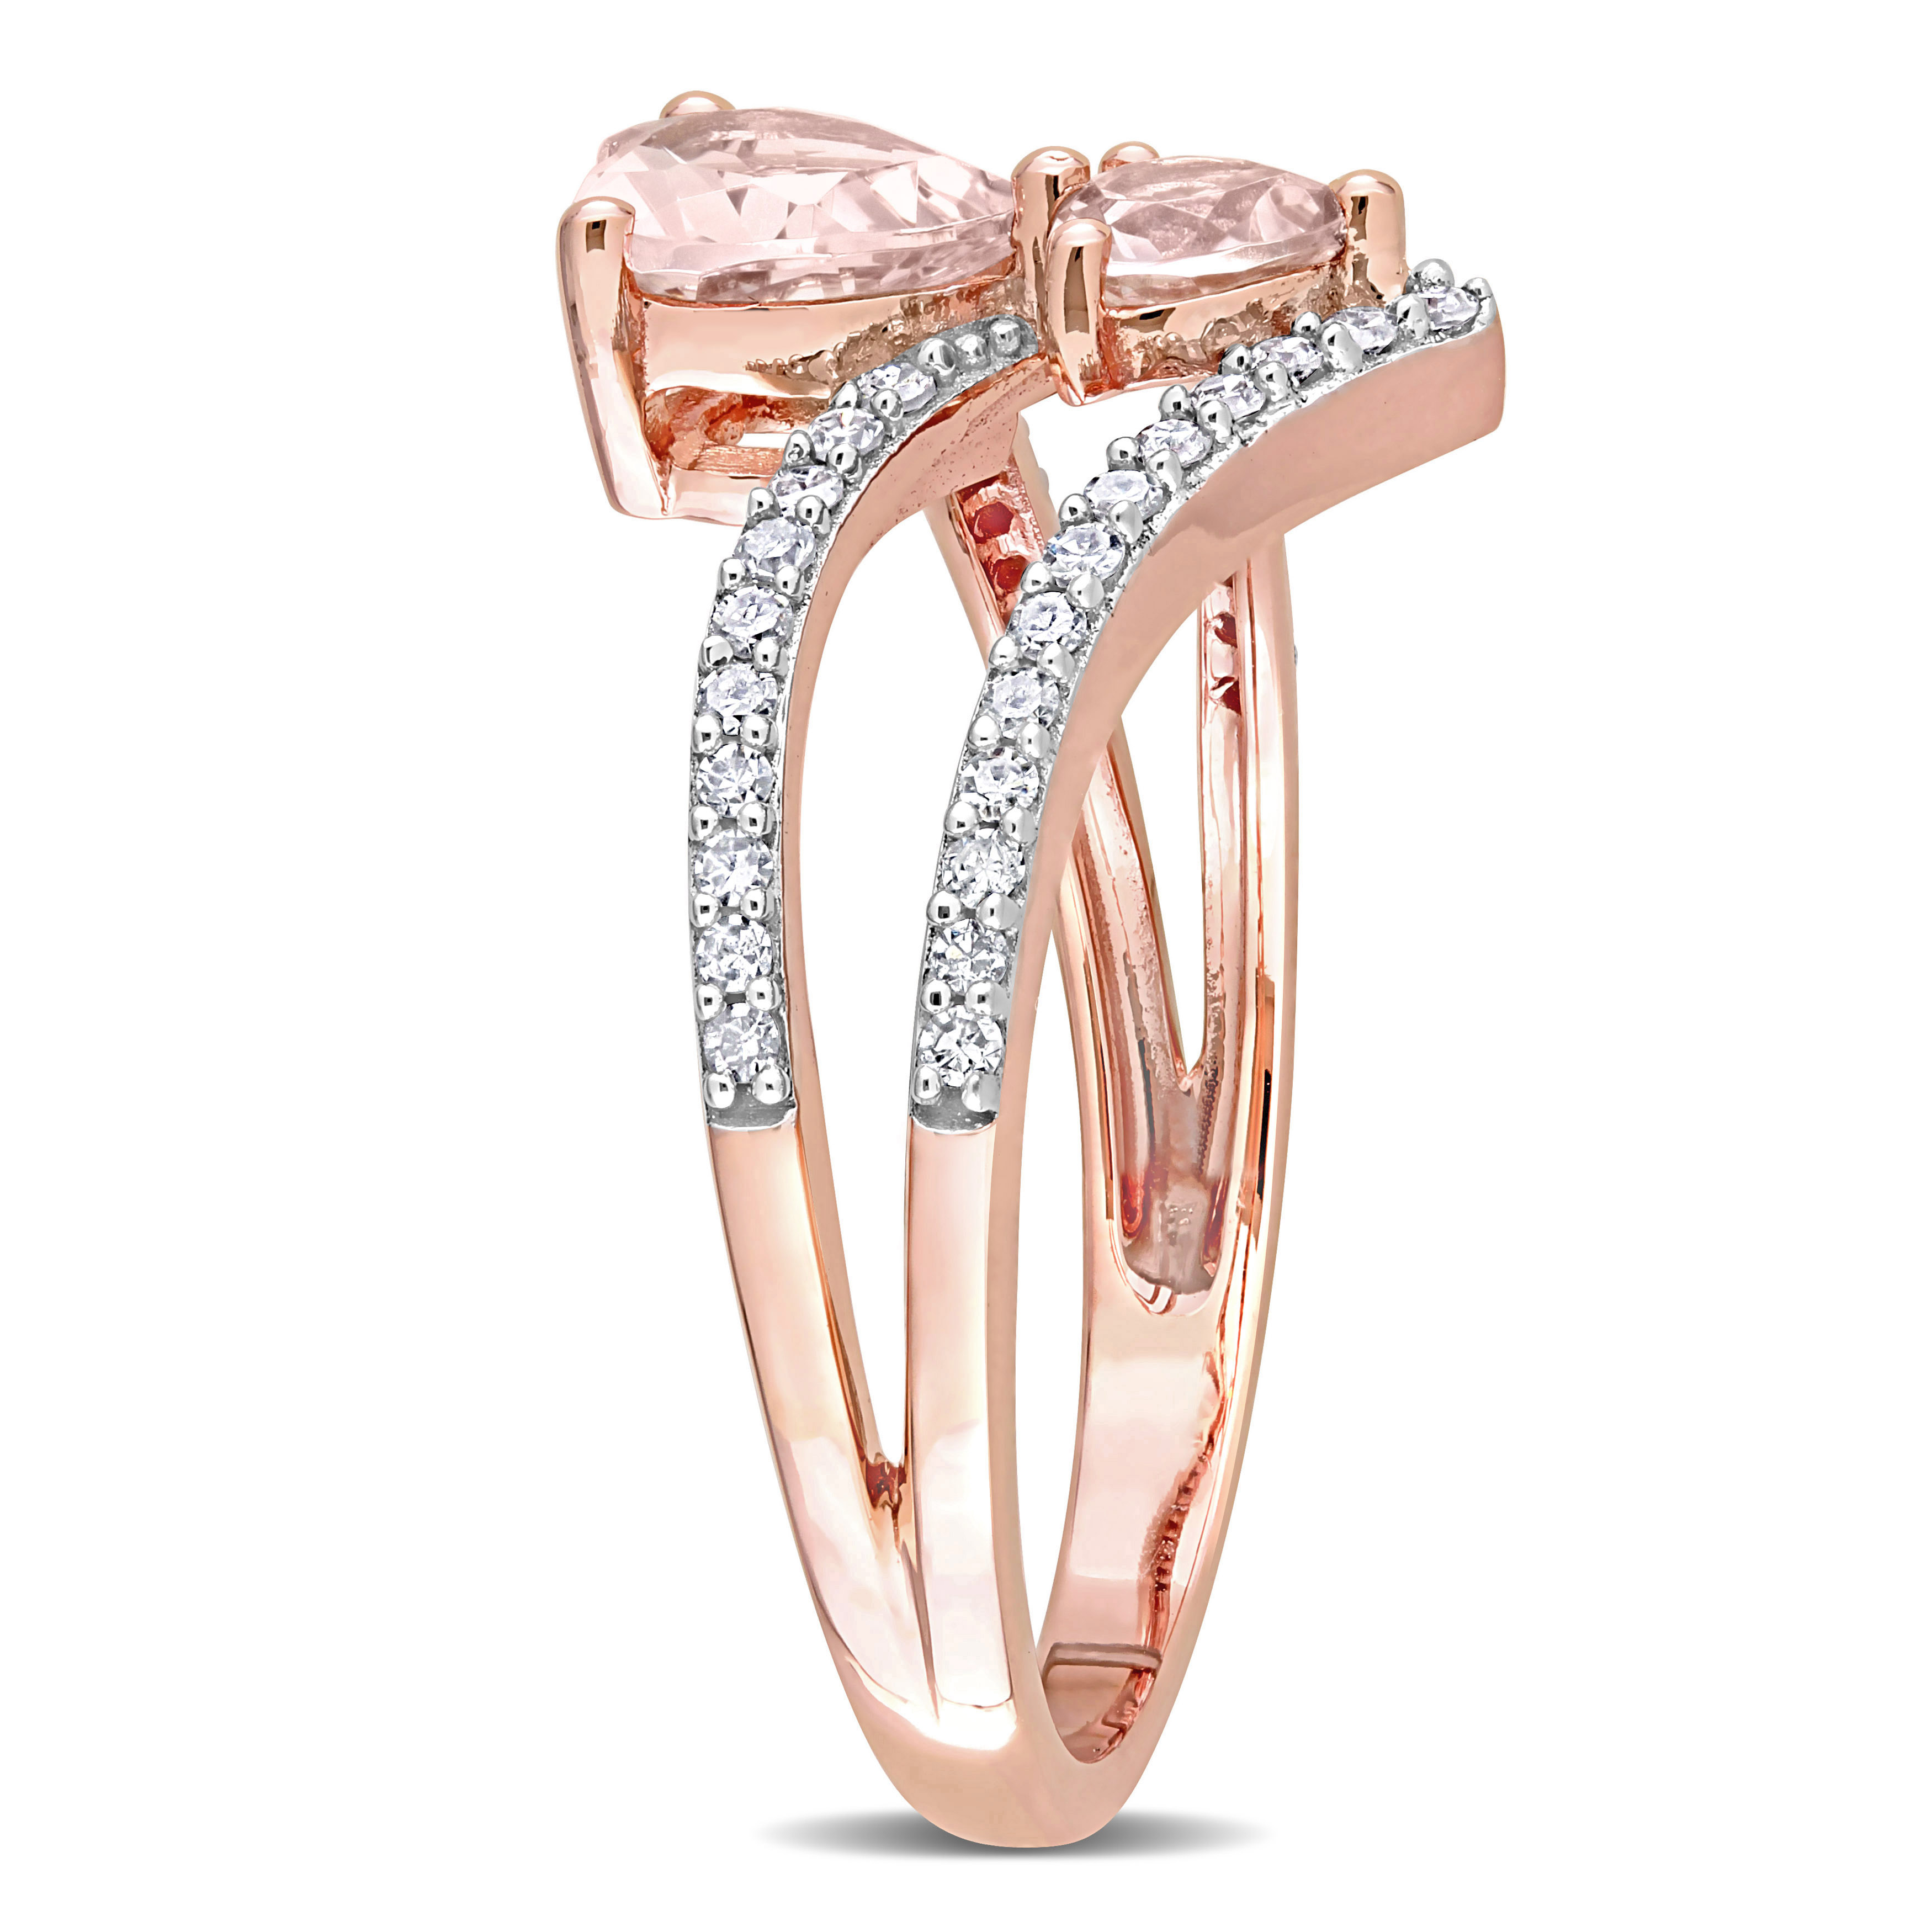 7/8 CT TGW Heart Shape Morganite and 1/4 CT Diamond 2-Stone Open Ring in 10k Rose Gold